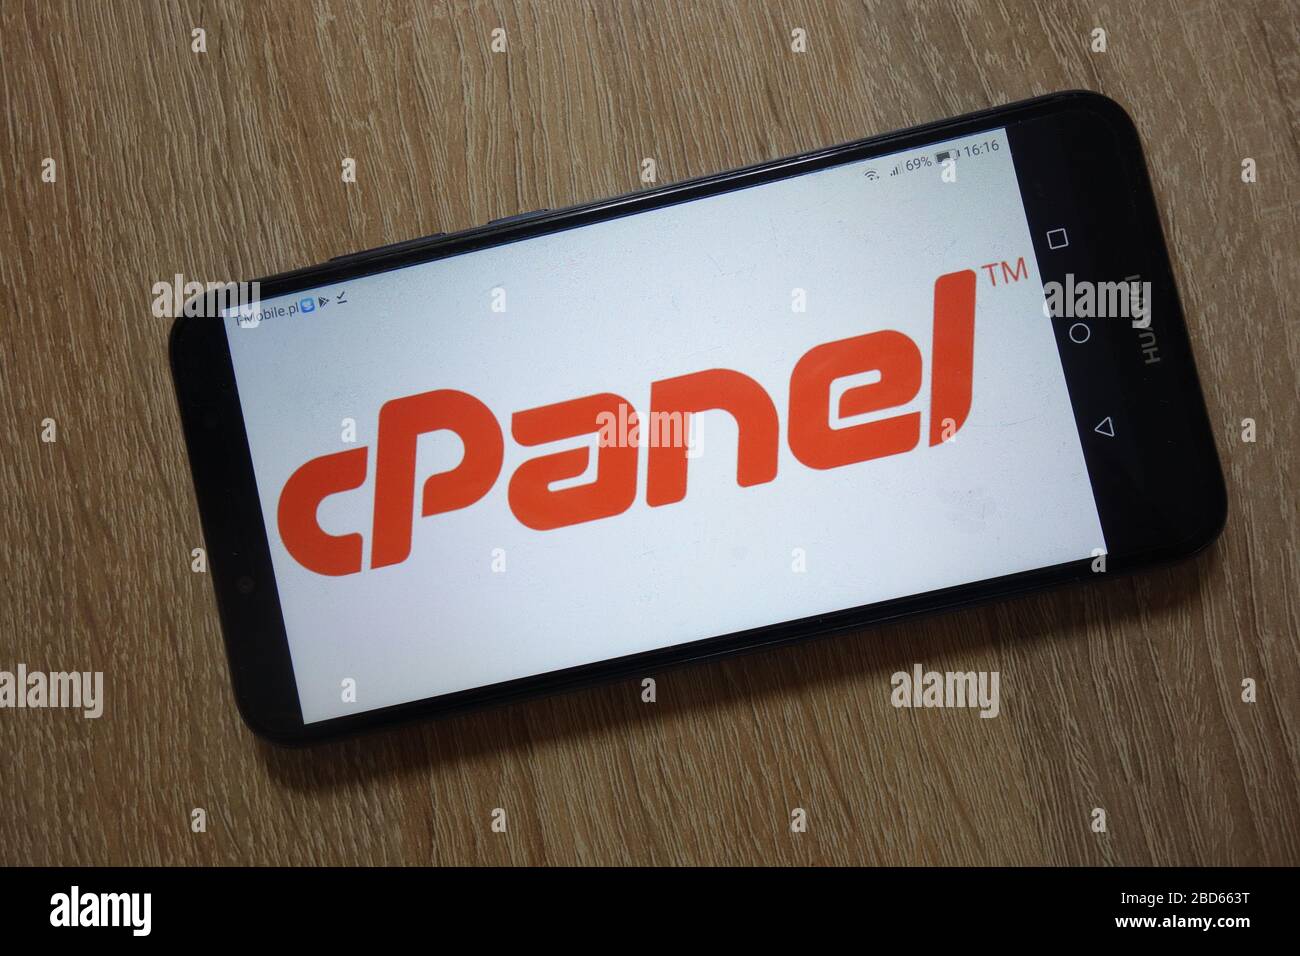 cPanel logo displayed on smartphone. cPanel is an online Linux-based web hosting control panel Stock Photo